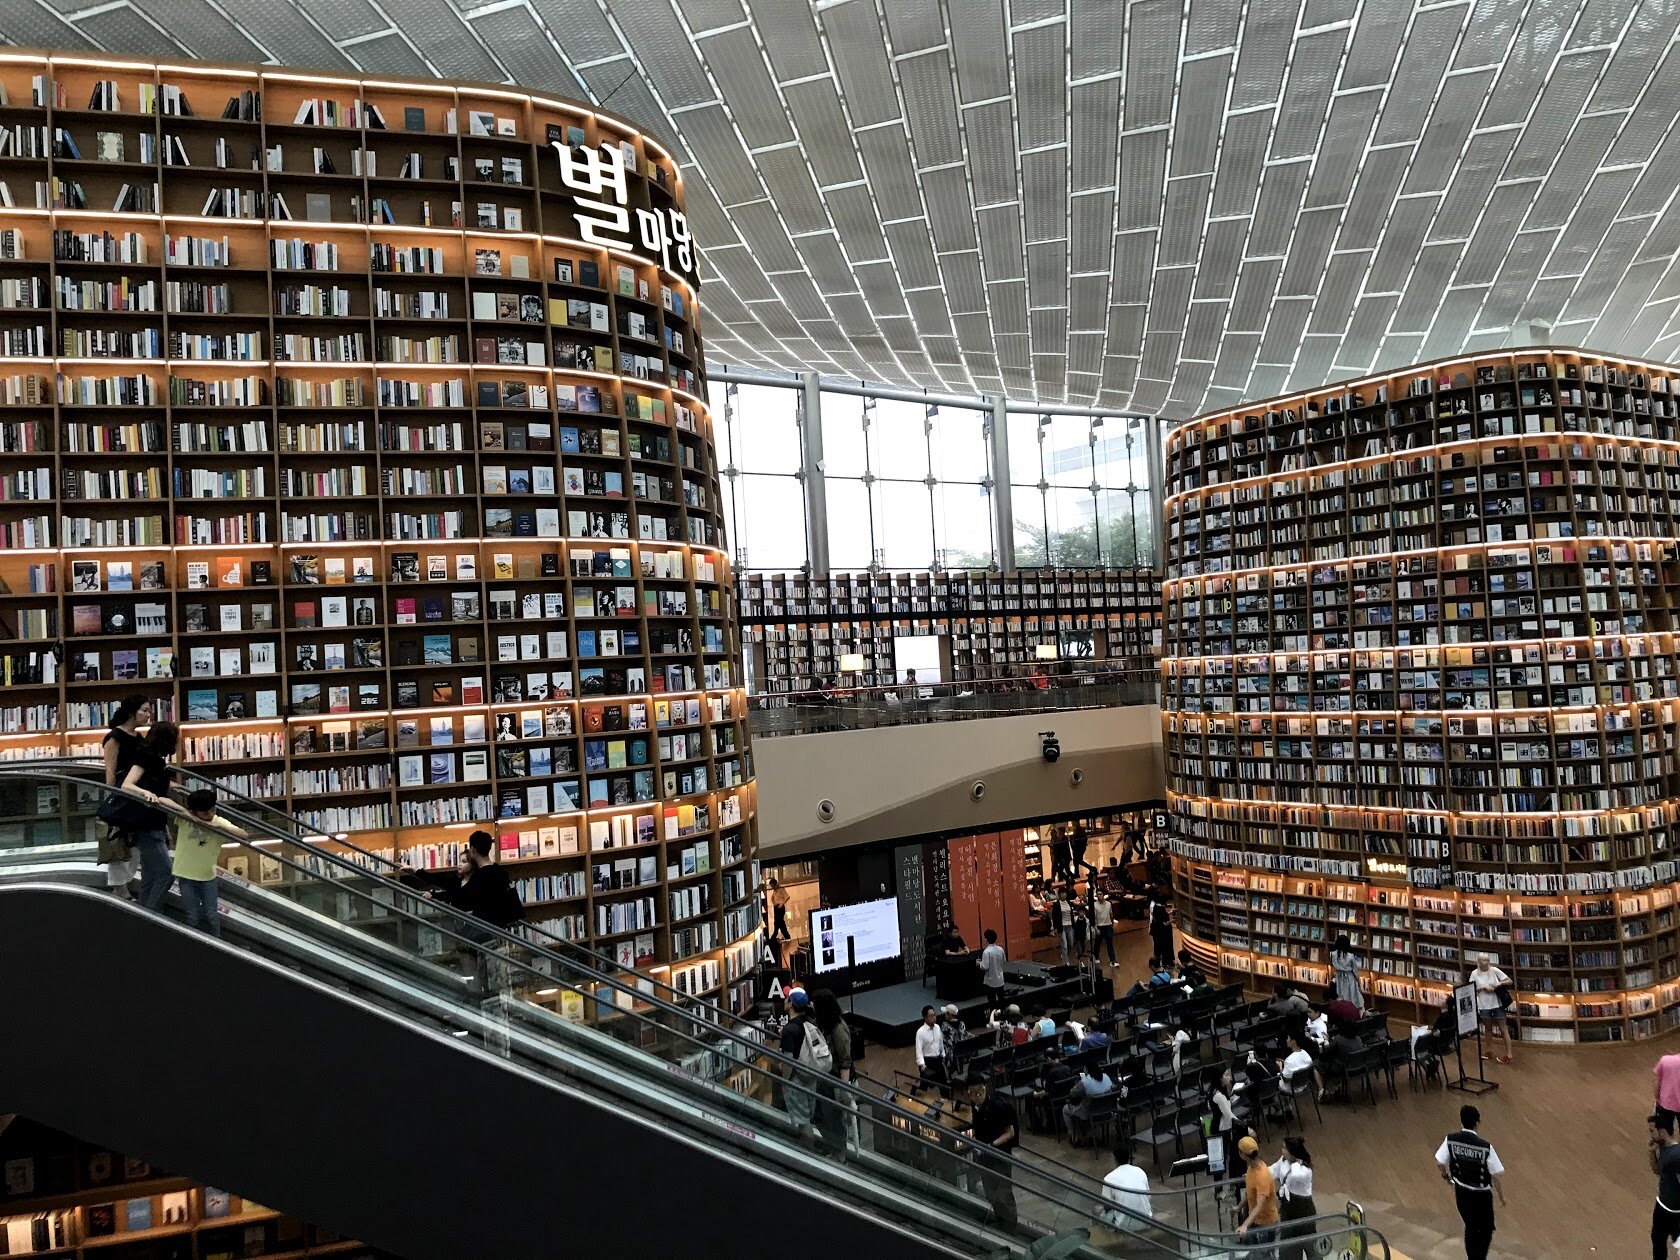 Starfield Library in Seoul, South Korea